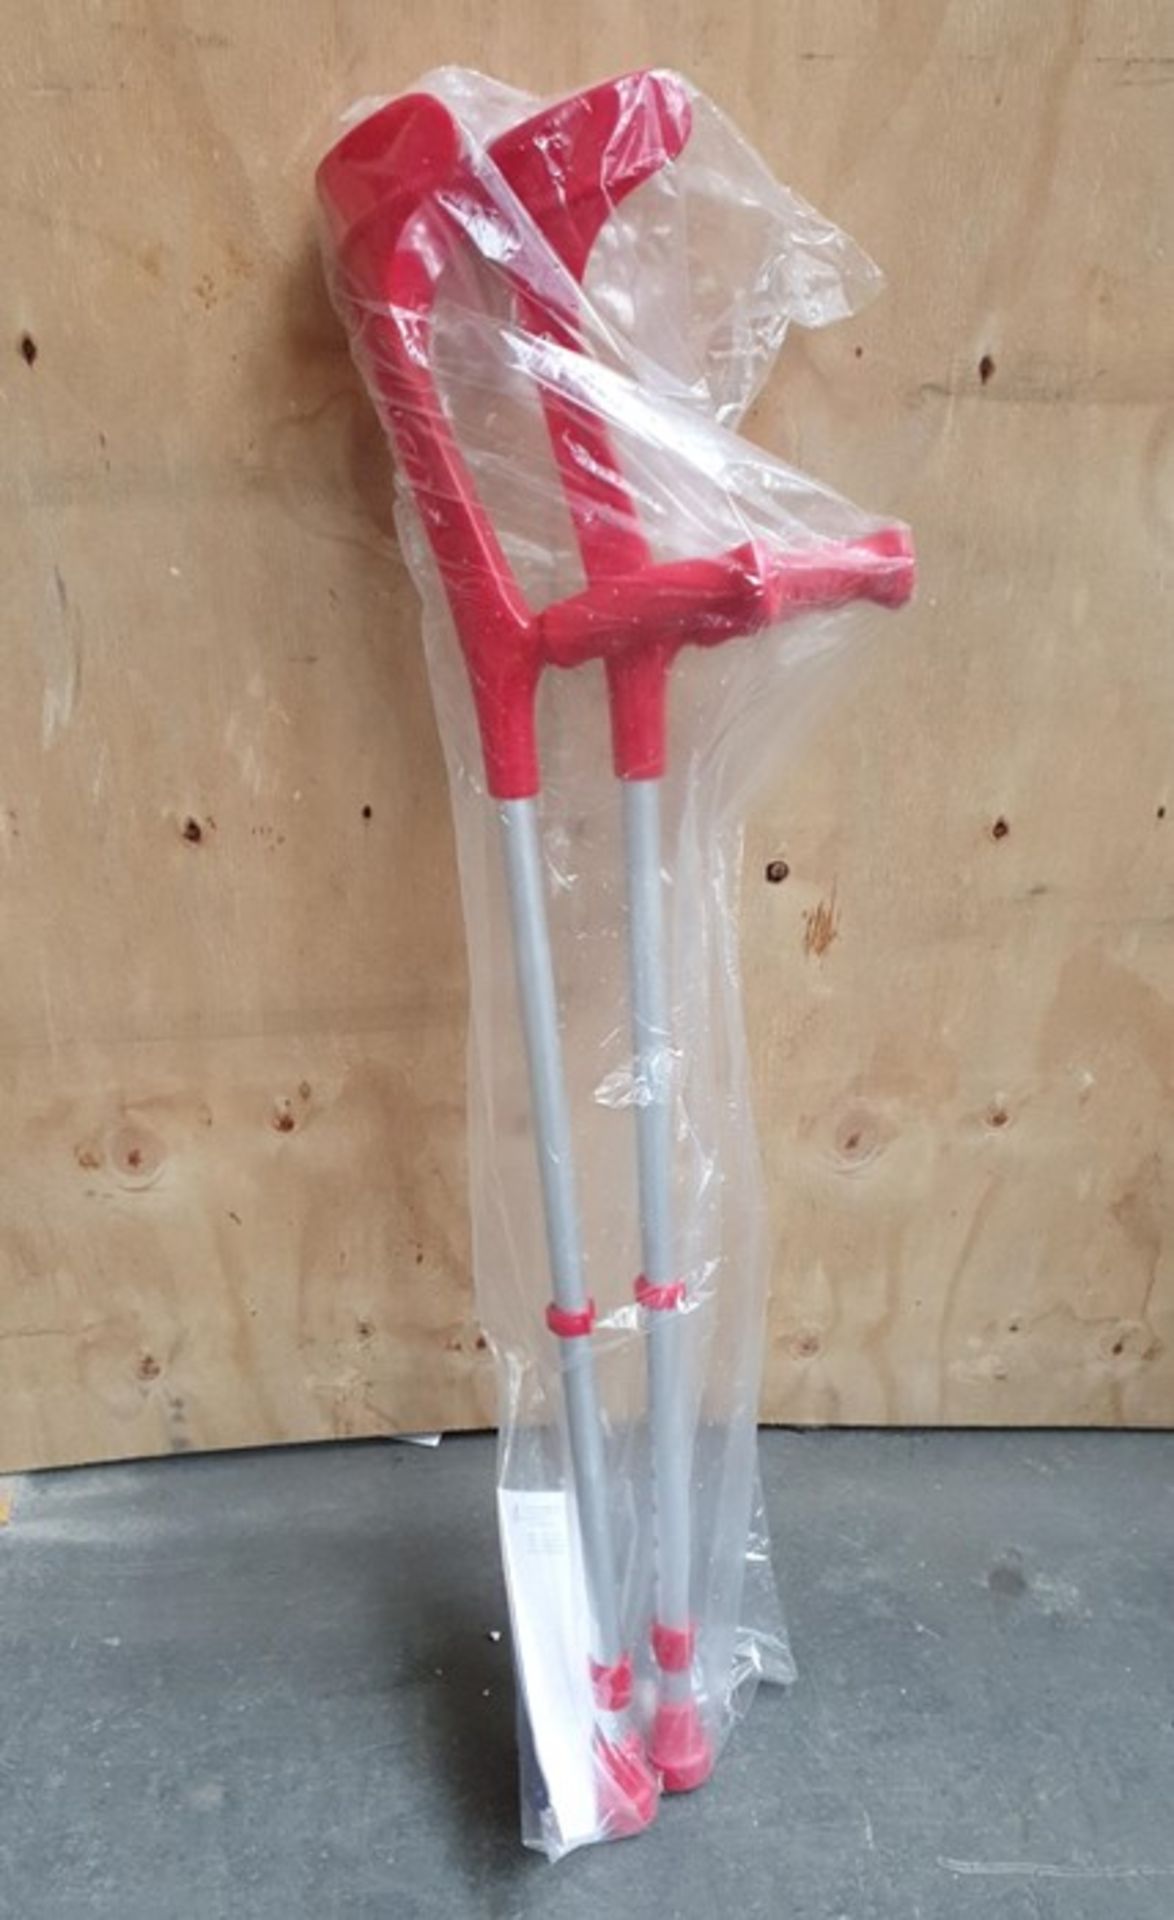 ME : 1 AS NEW PACKAGED PAIR OF KOWSKY RED SOFT GRIP ALUMINIUM ADJUSTABLE CRUTCHES / RRP £29.95 (